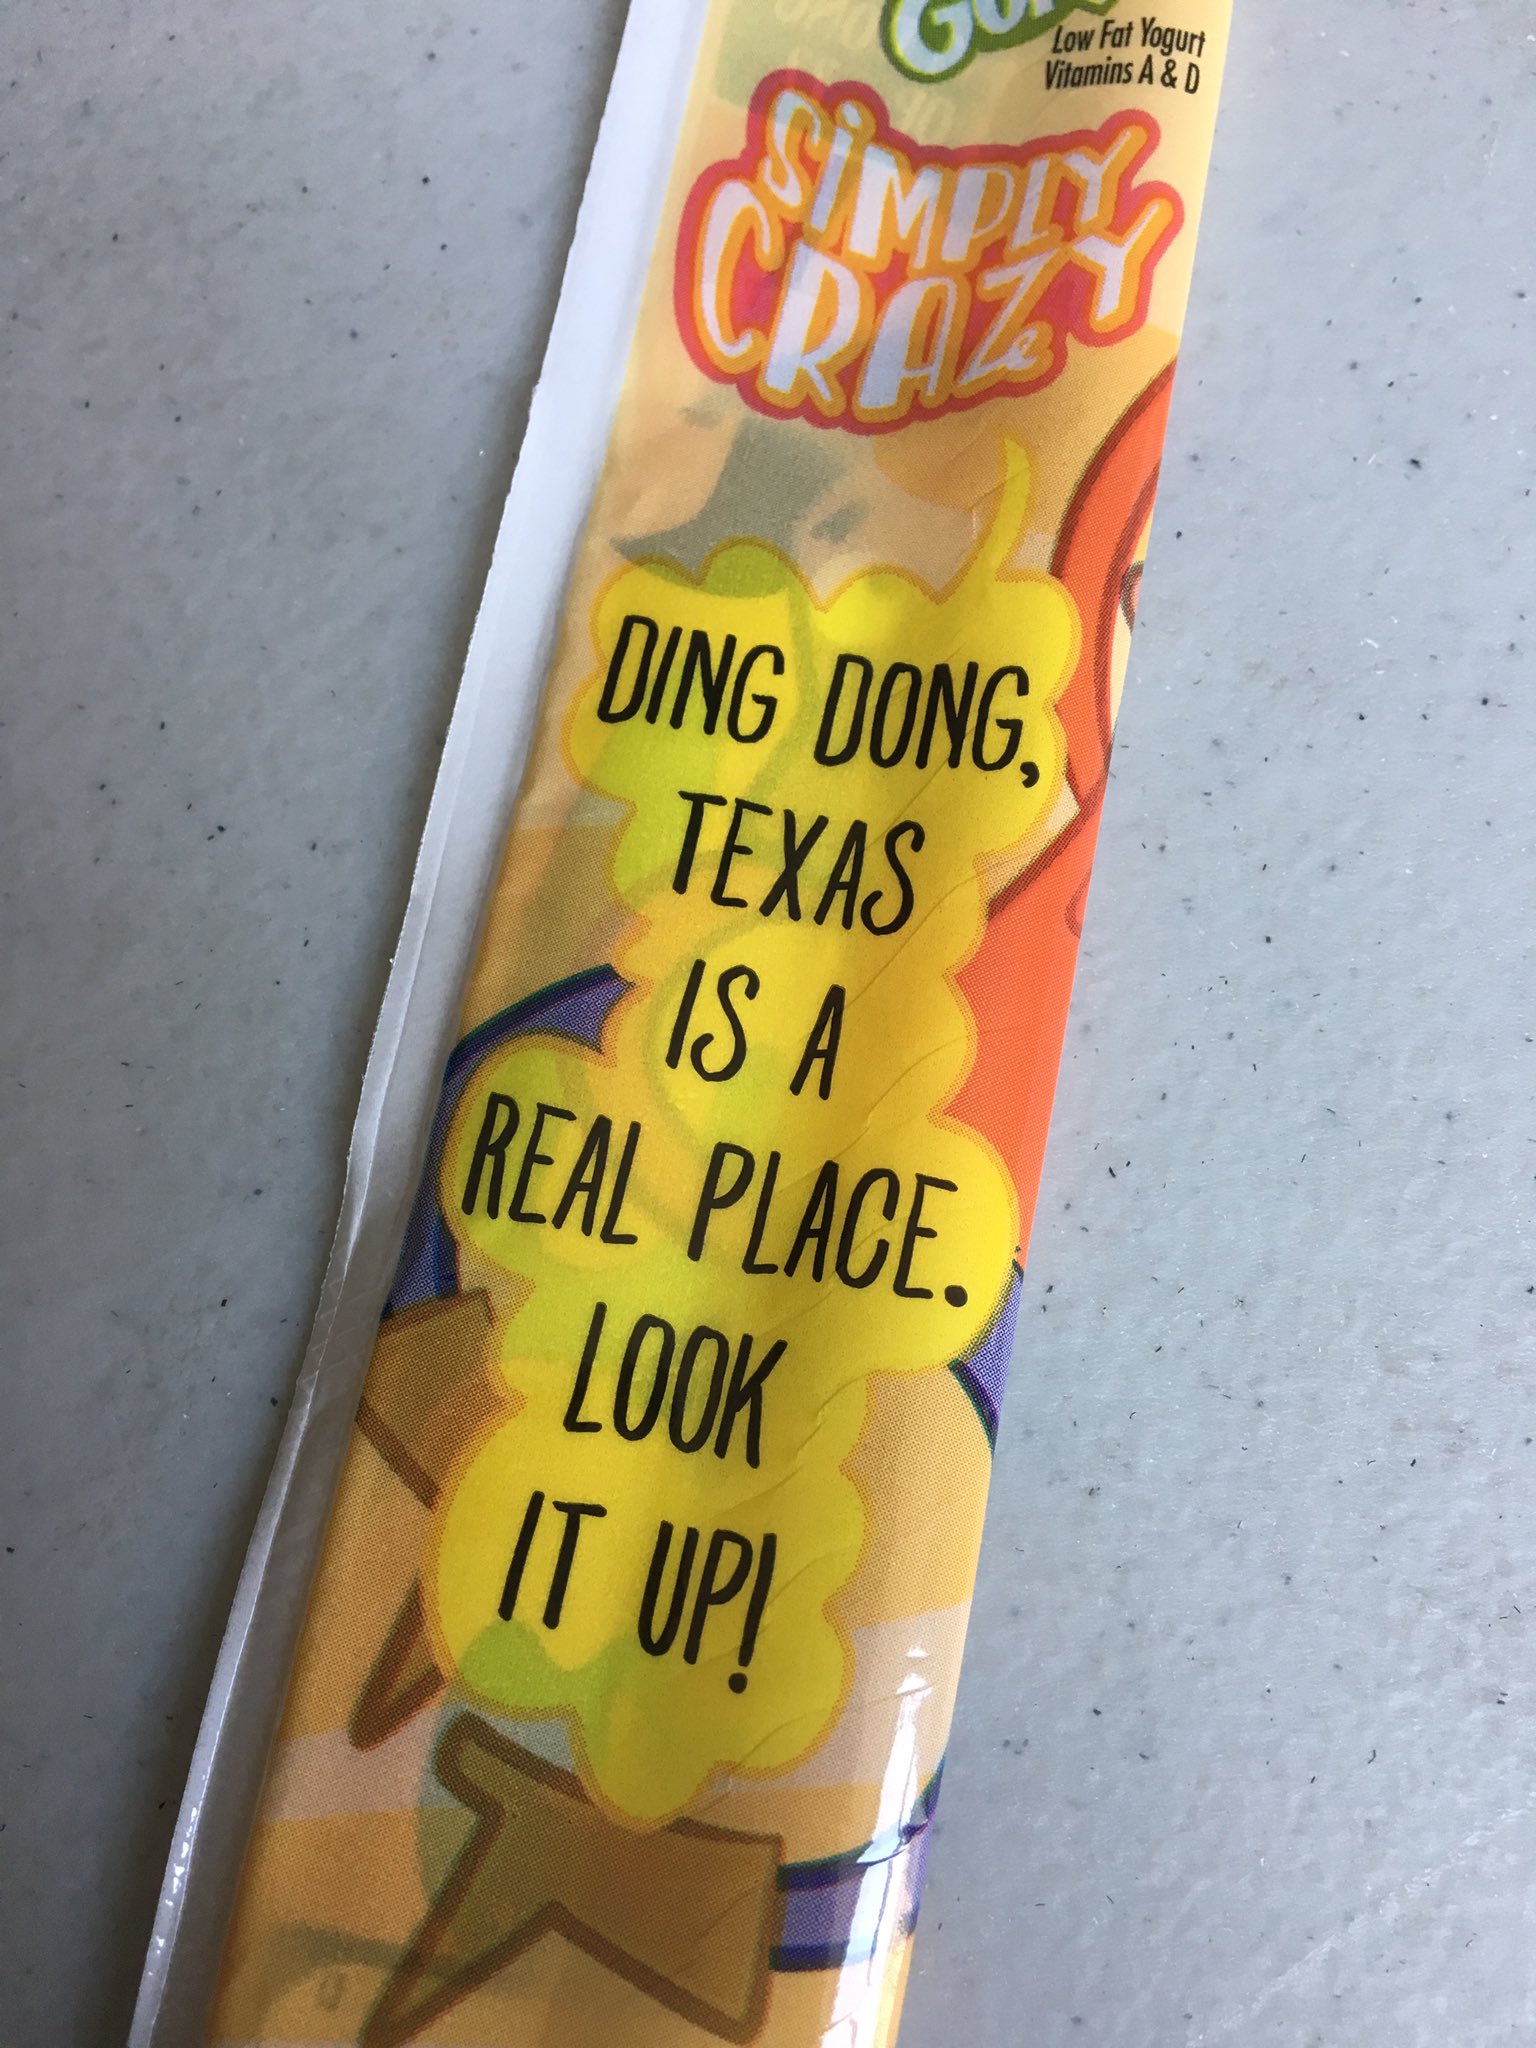 Feminine Miss Geek For A Moment I Thought My Gogurt Was Insulting Me Hey Ding Dong Texas Is A Real Place Look It Up Ya Ding Dong T Co 5dqdfzupdv